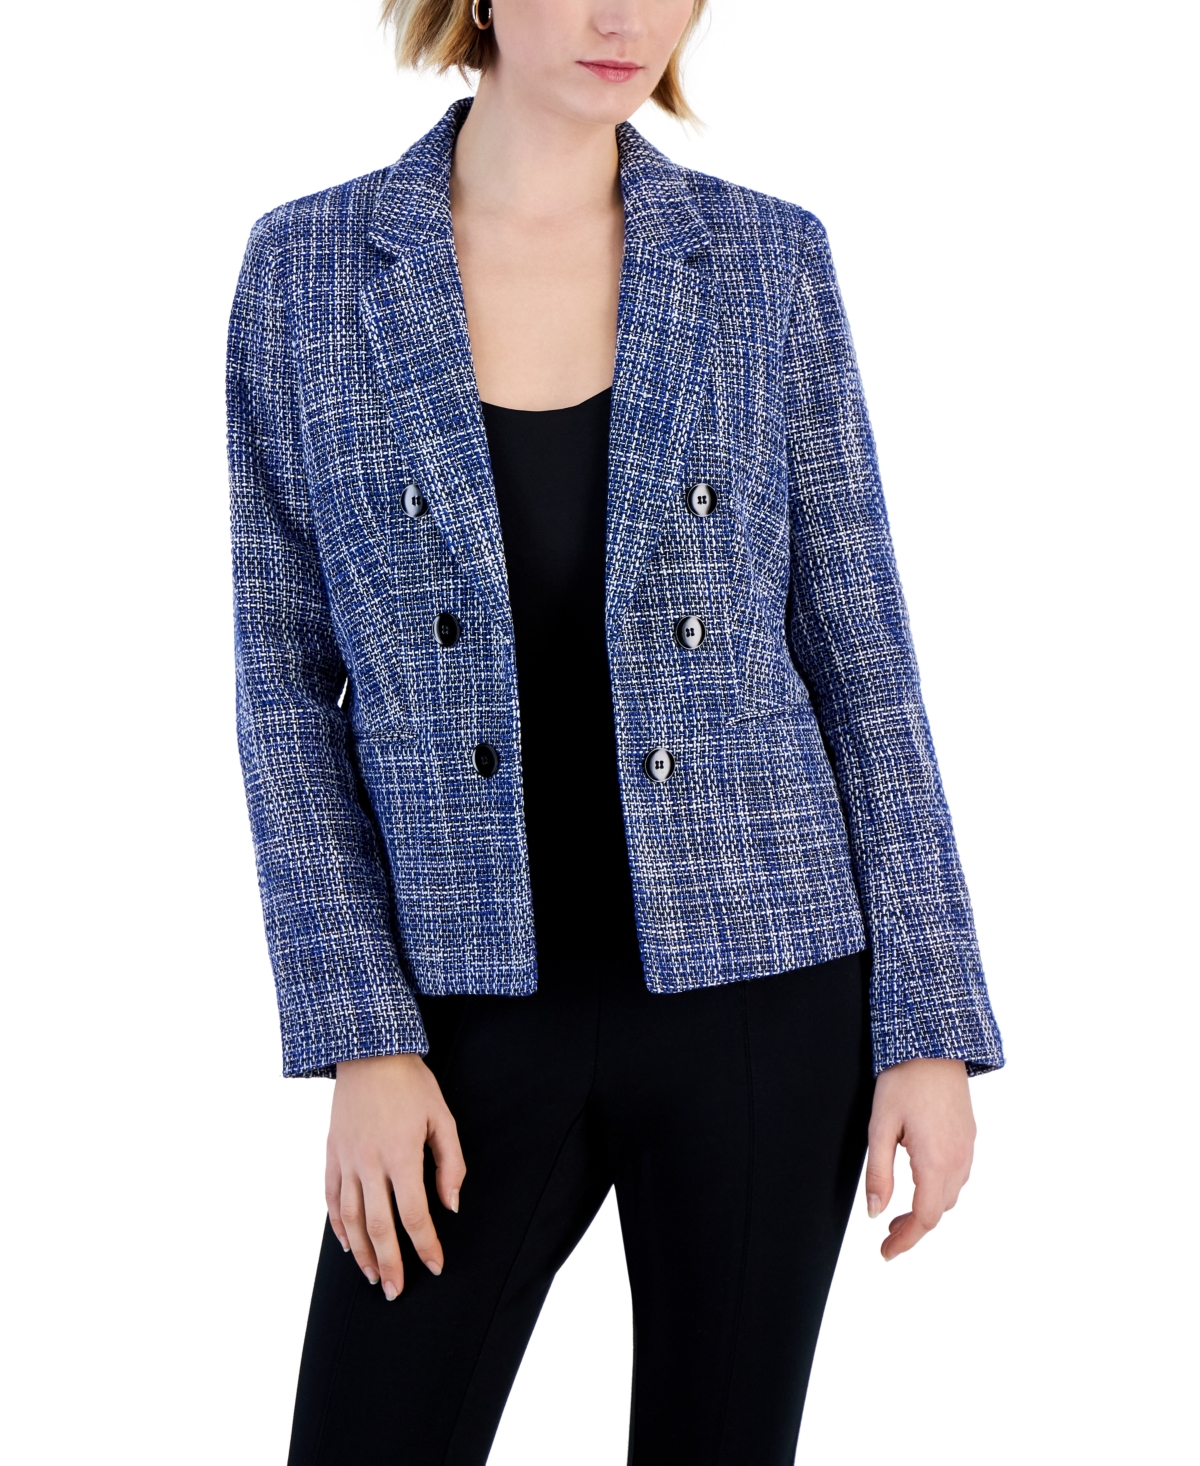 Women's Tweed Faux-Double-Breasted Blazer, Created for Macy's - Deep Blue Multi